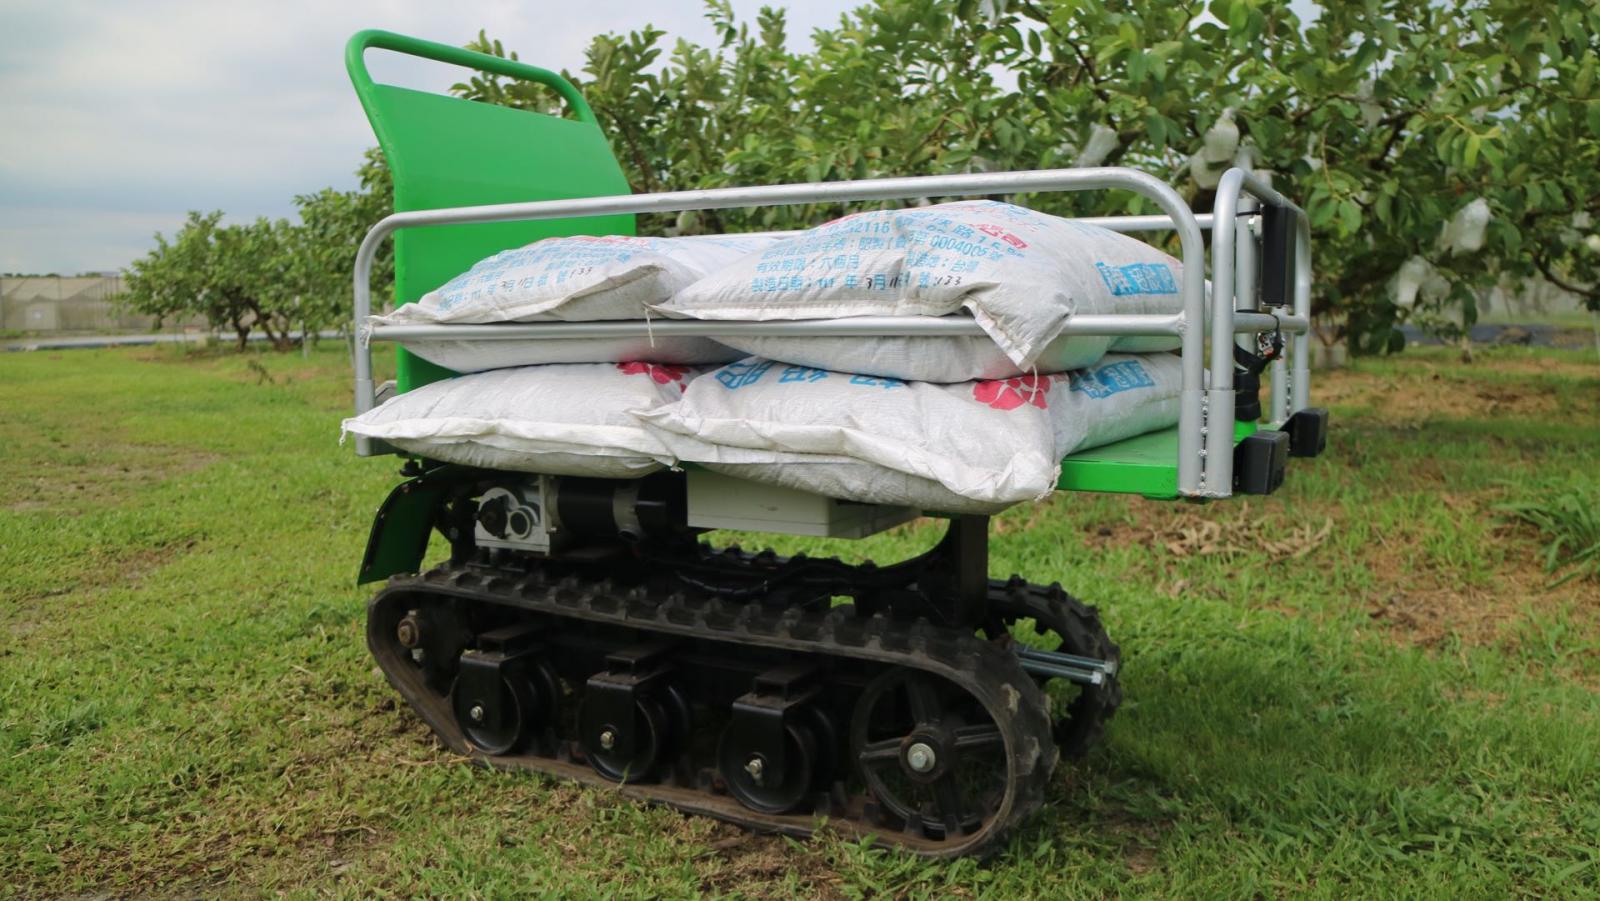 The “crawler type electric intelligent transport machine” can carry up to 200 kilograms, despite being only 135 centimeters in length and 60 centimeters wide; its small size makes it easy to move and turn around in the narrow spaces in farm fields.